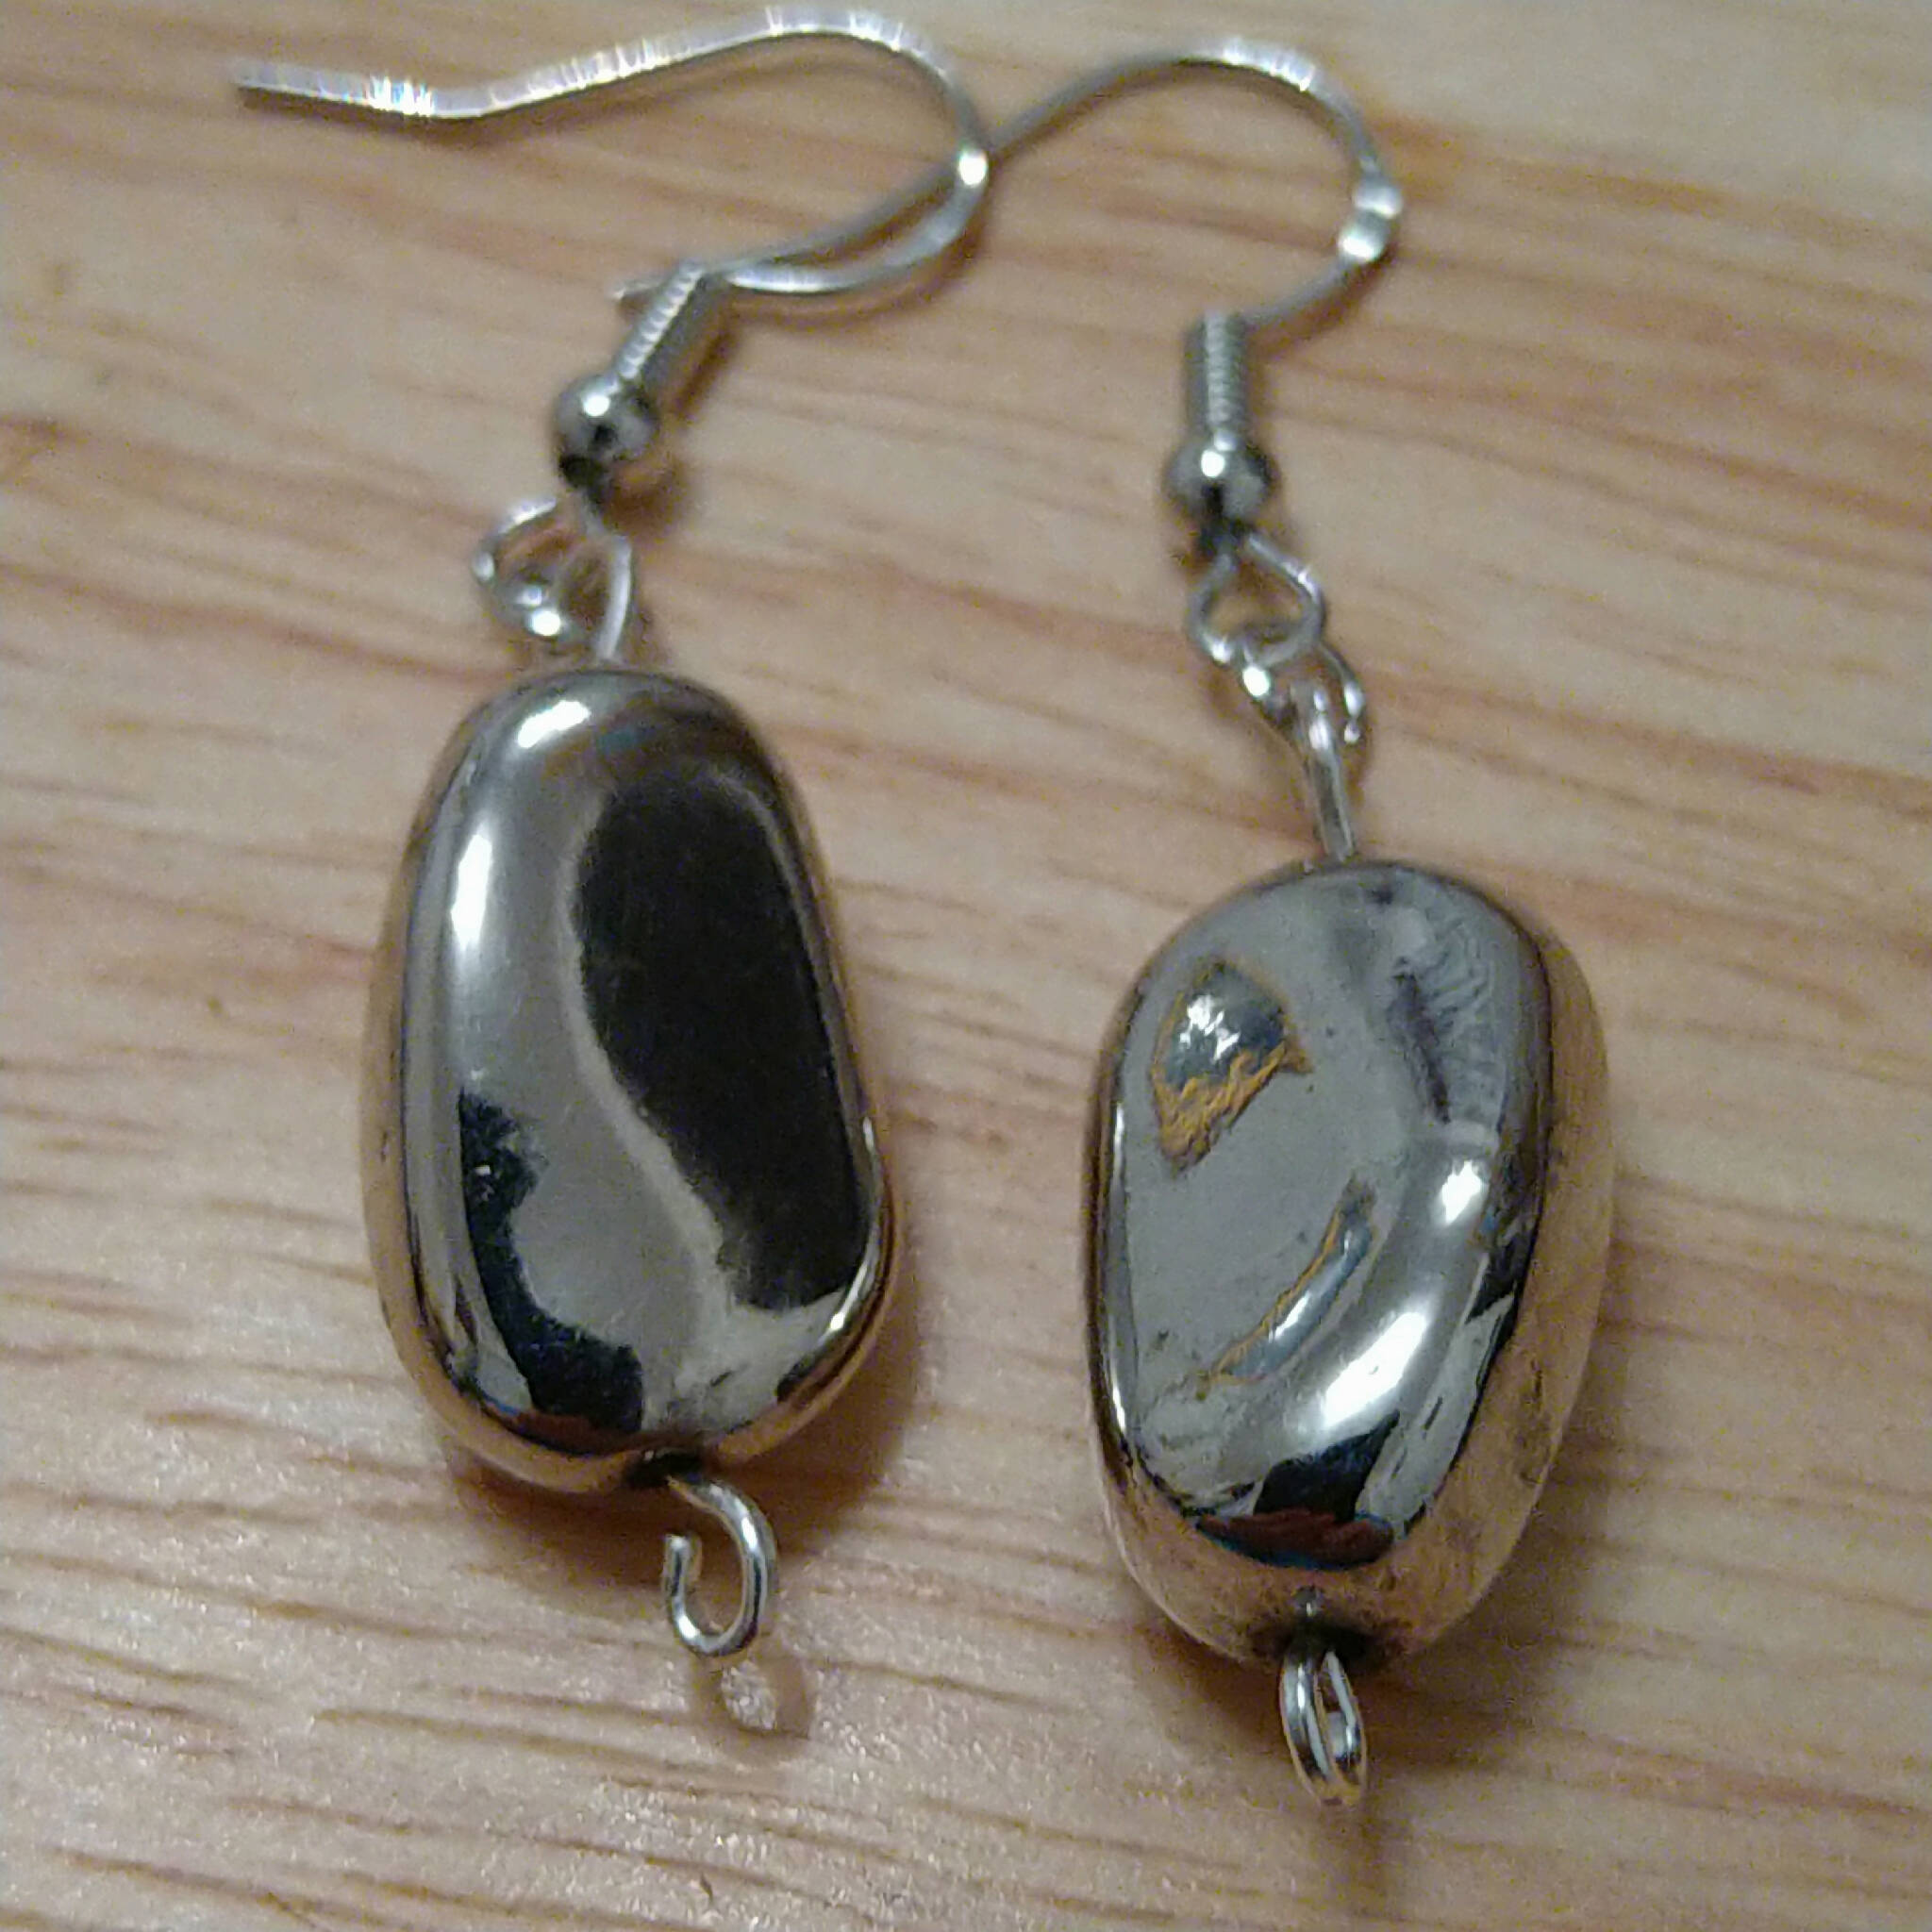 Handmade earrings with silver coloured "nugget" bead